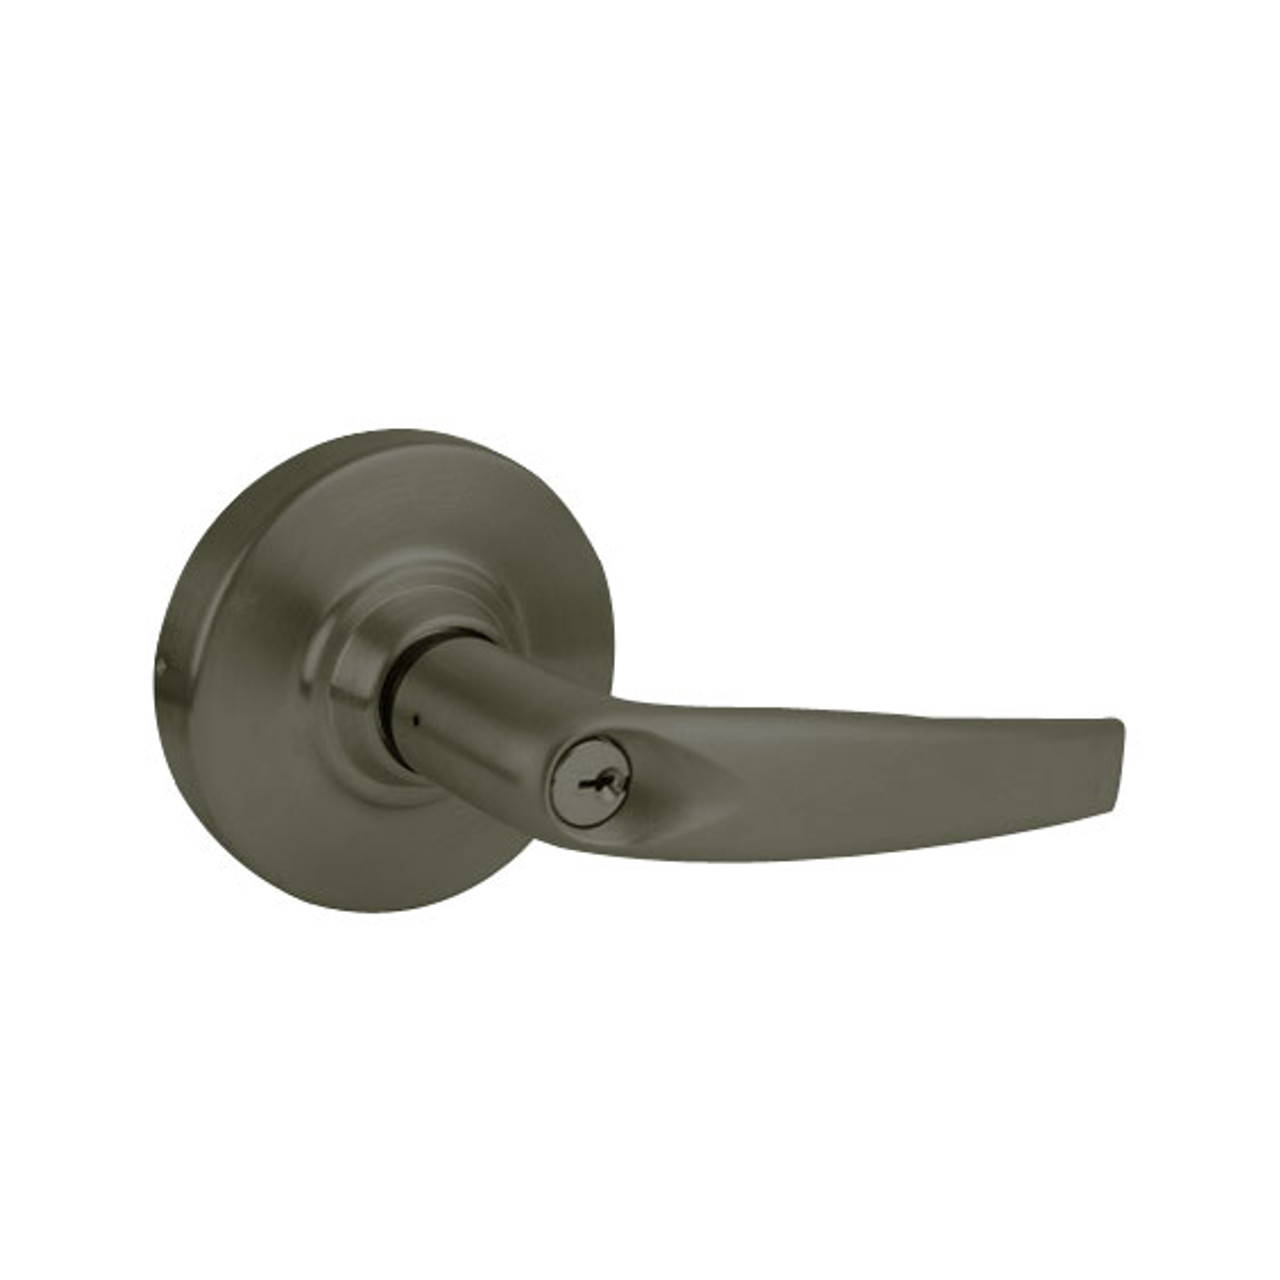 ND82PD-ATH-613 Schlage Athens Cylindrical Lock in Oil Rubbed Bronze